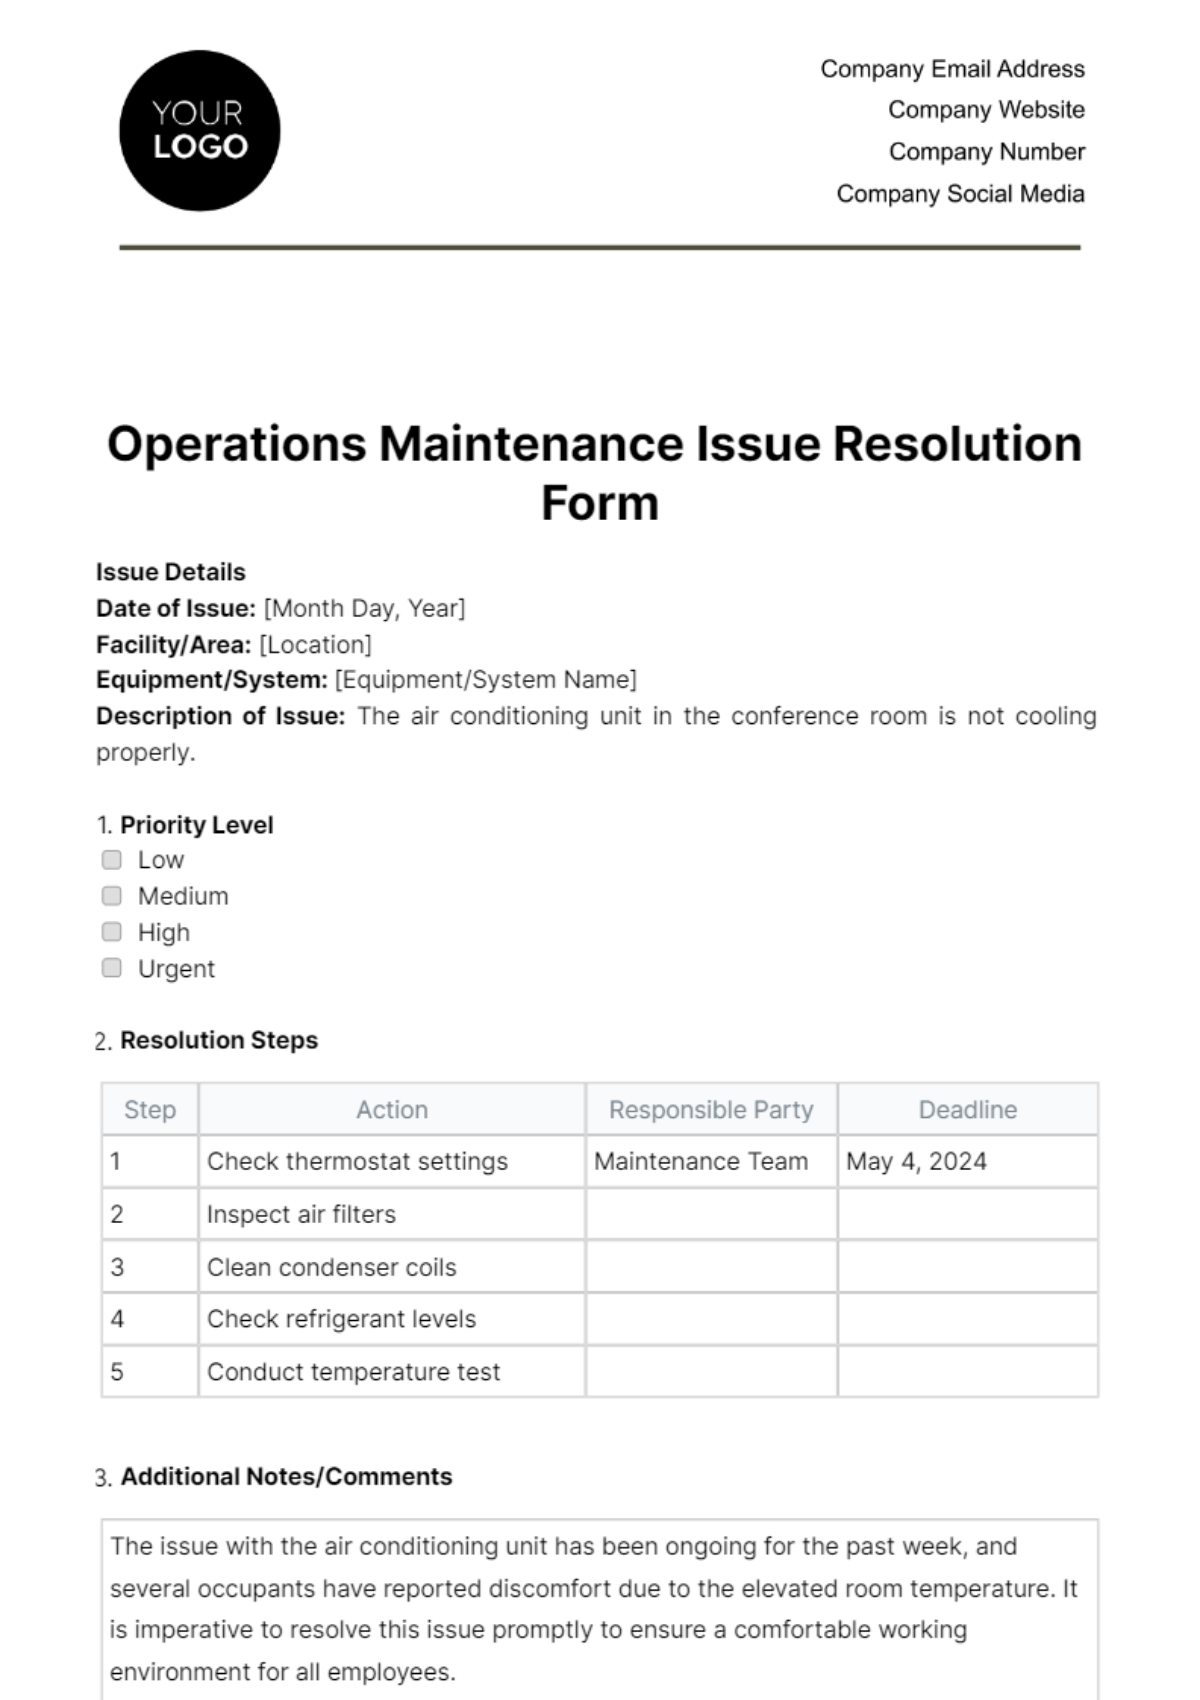 Operations Maintenance Issue Resolution Form Template